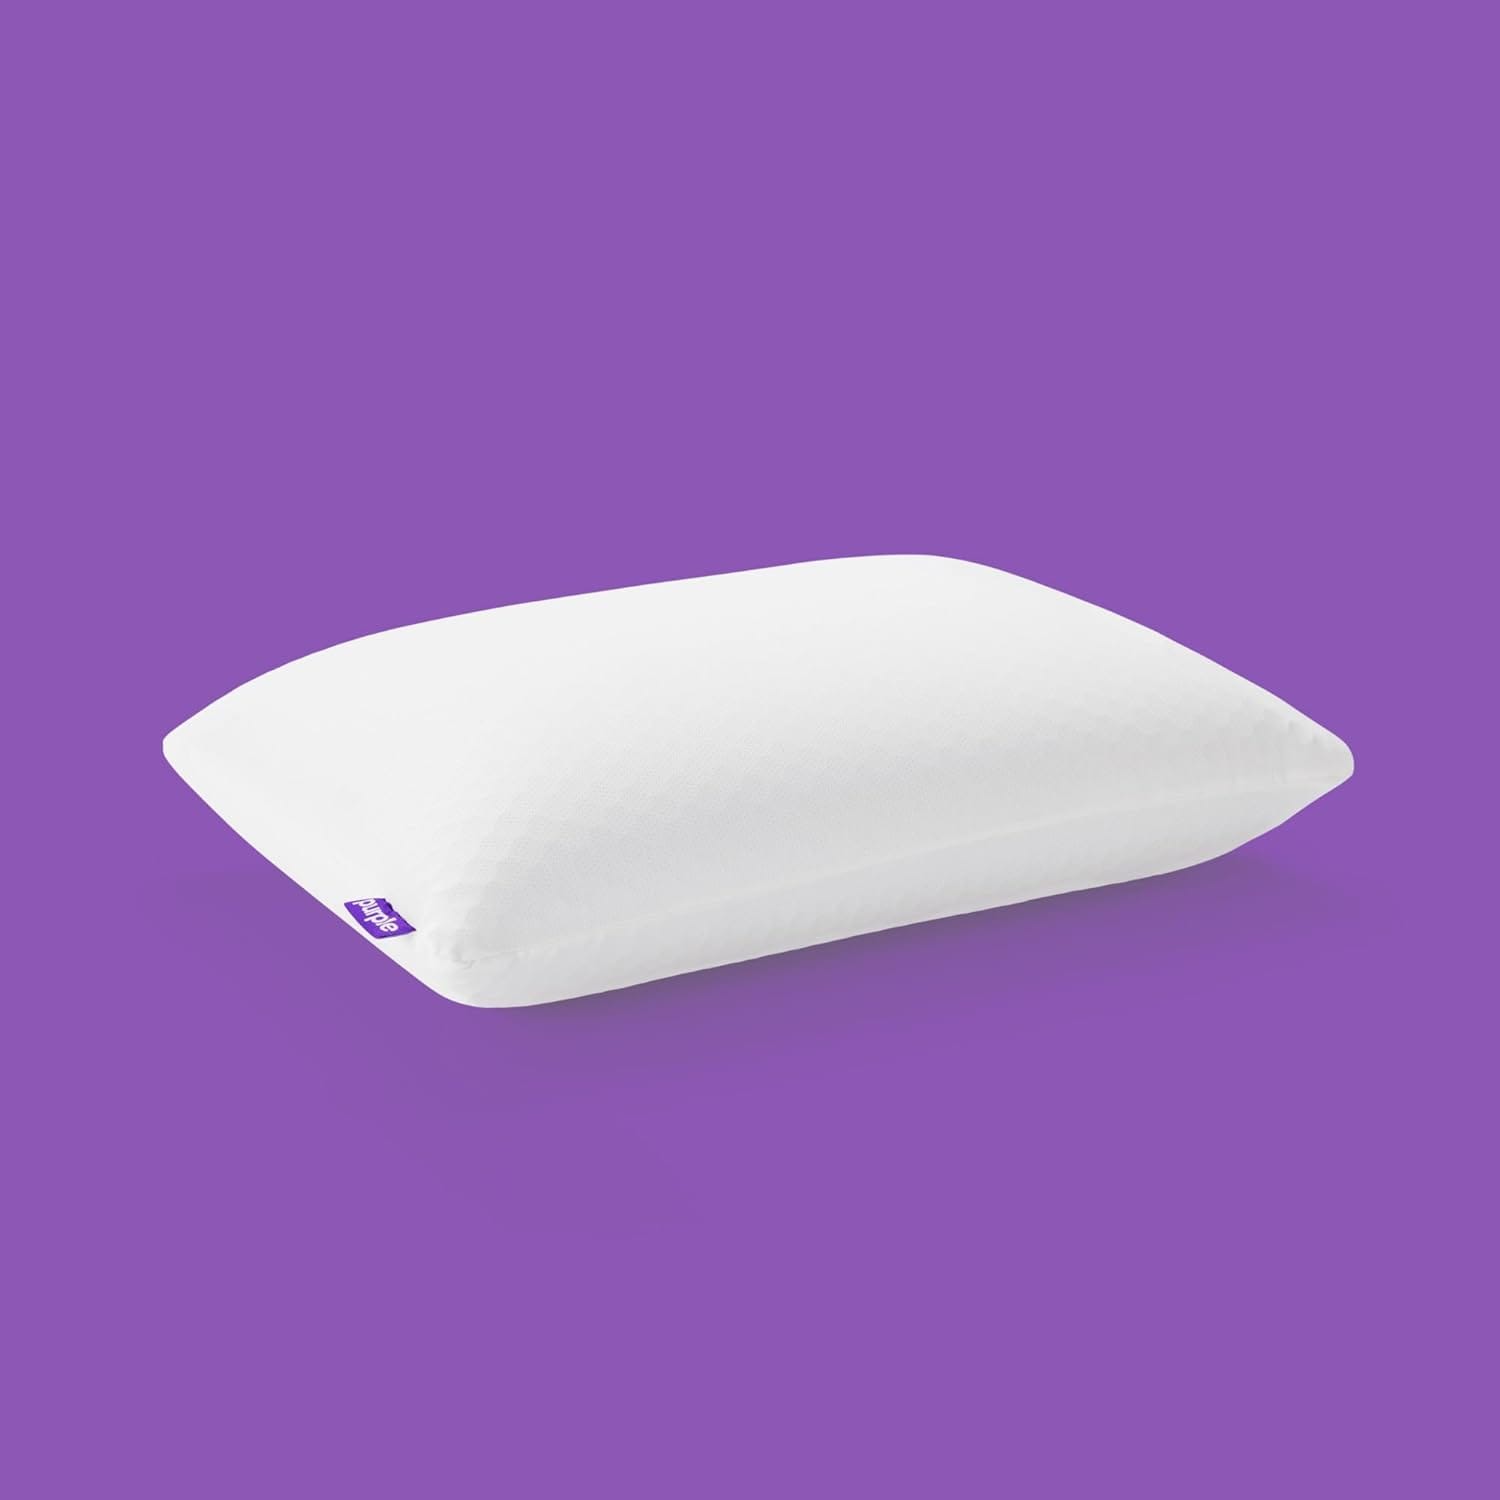 "The Best Ghost Pillow Picks: Say Goodbye to Sleepless Nights"